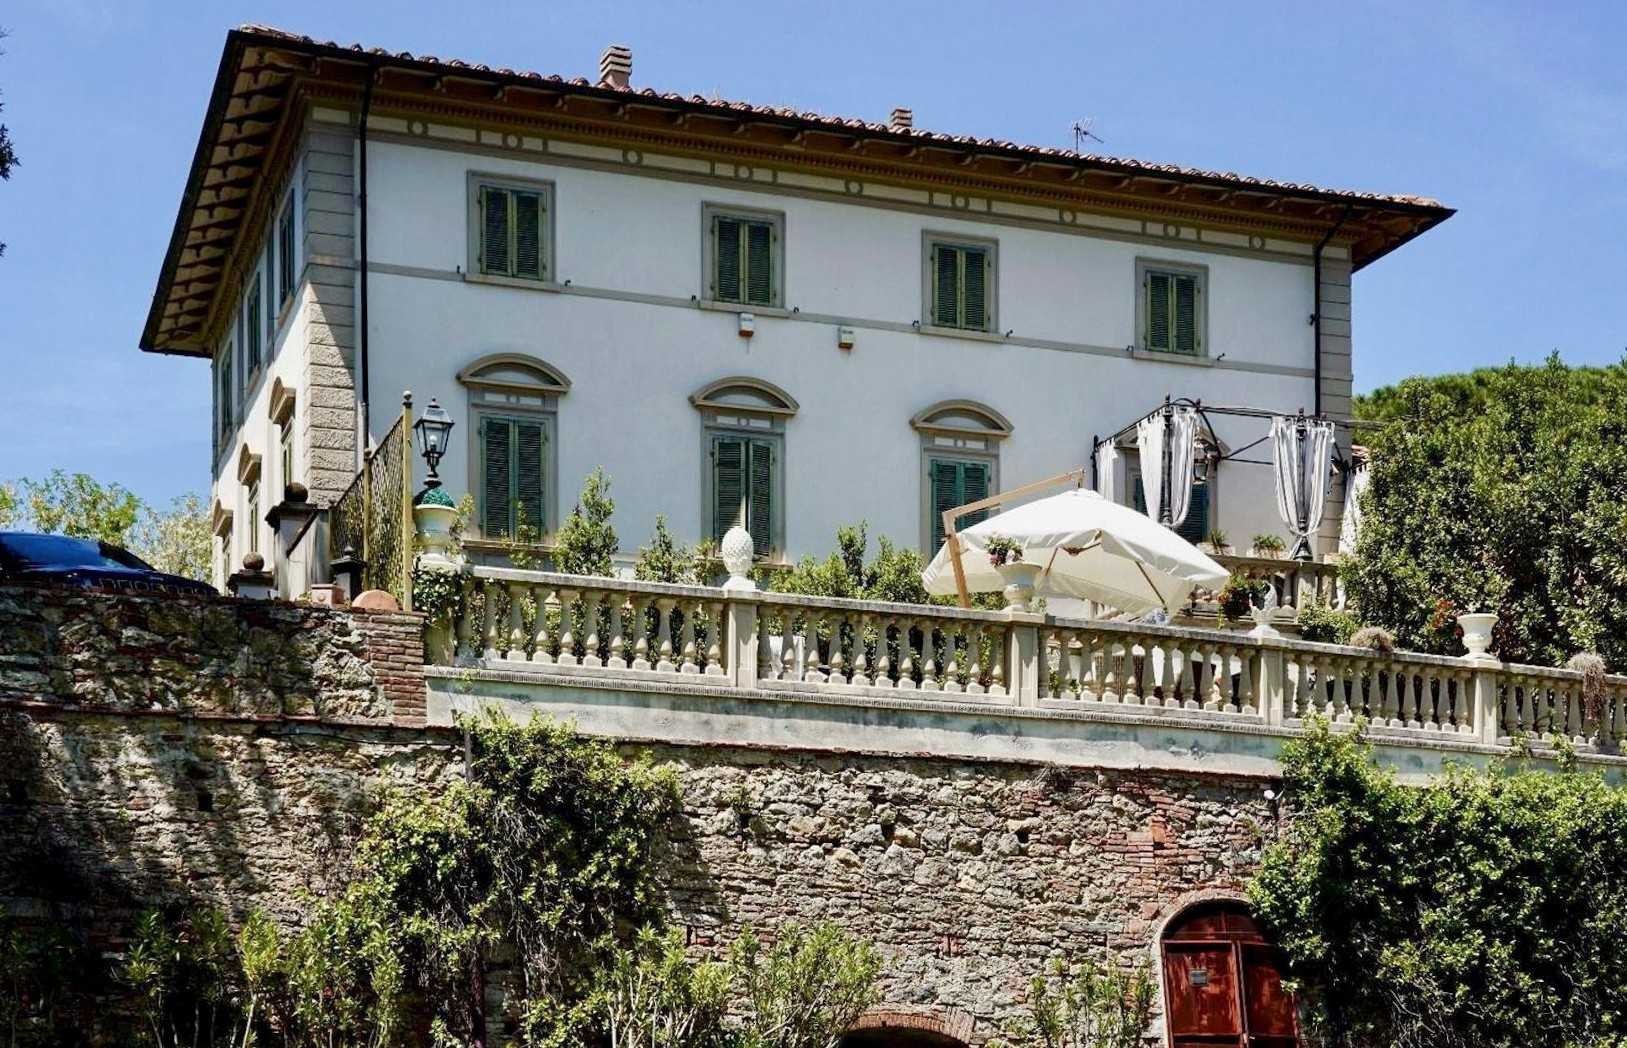 Photos Two exclusive residential units in historic villa near Pisa